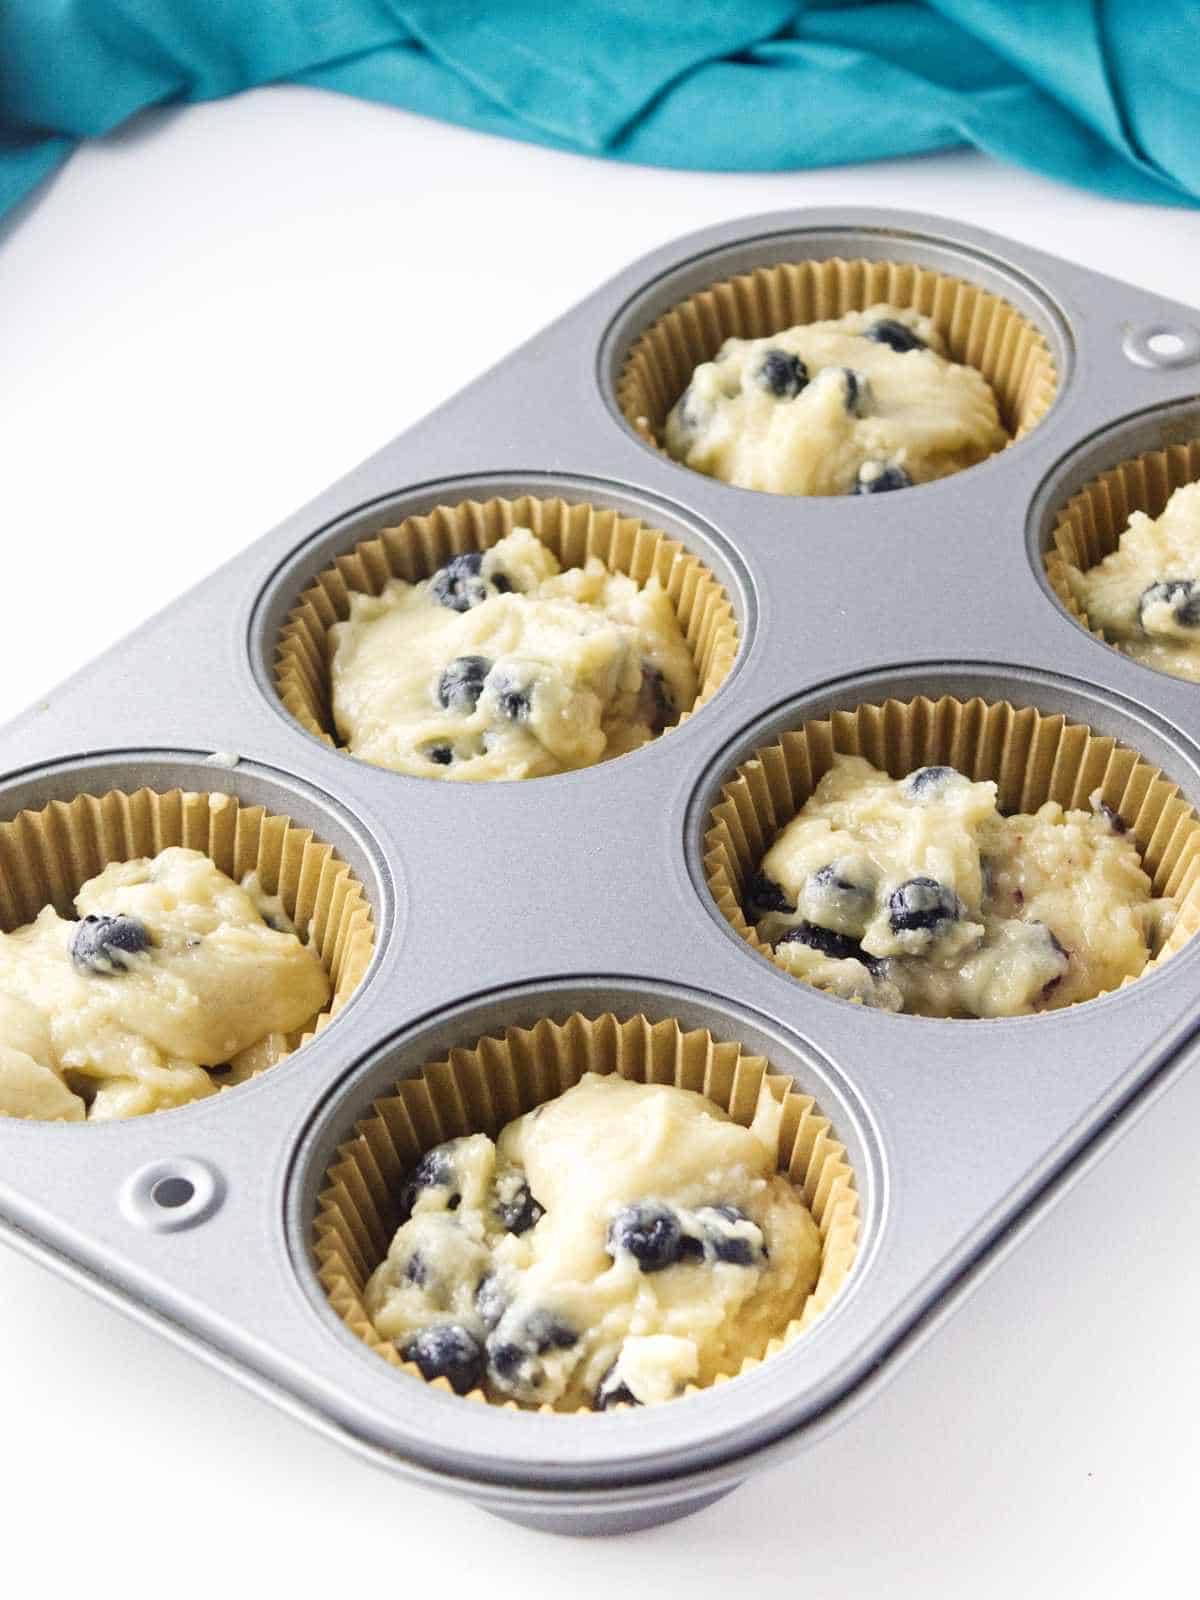 Muffin batter in Jumbo a bakery style size muffin tin.